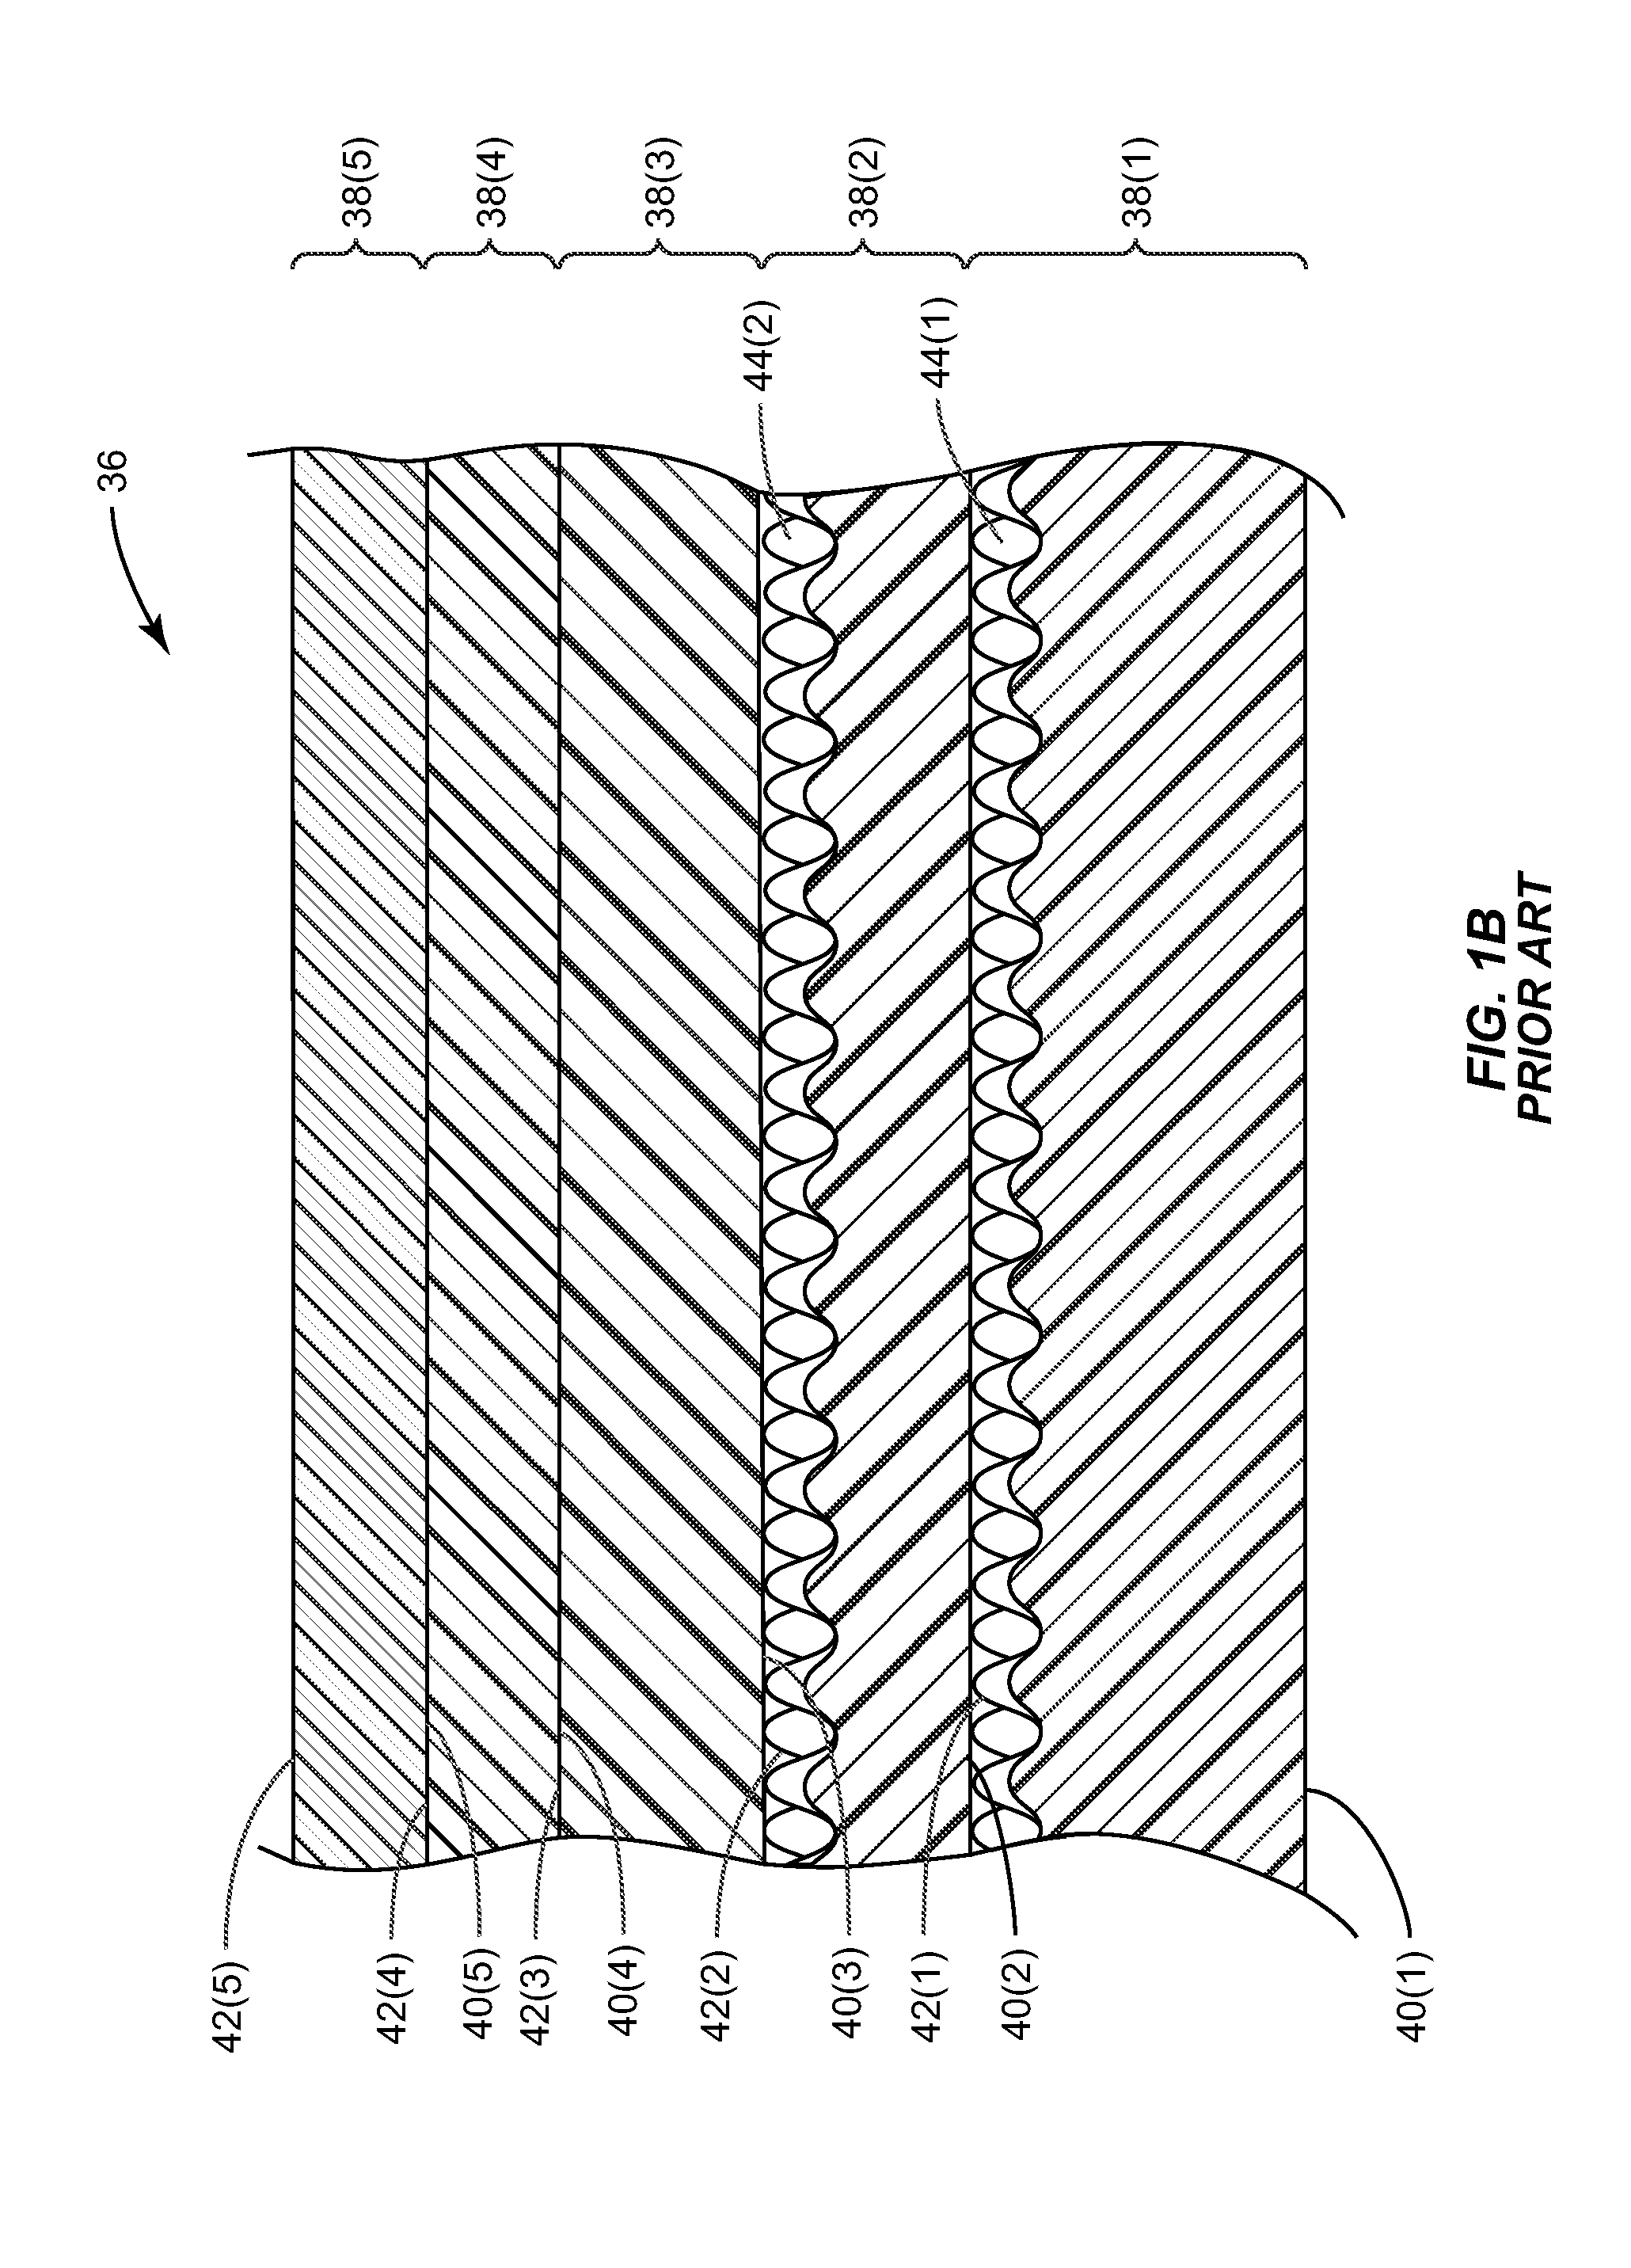 All-foam mattress assemblies with foam engineered cores having thermoplastic and thermoset materials, and related assemblies and methods